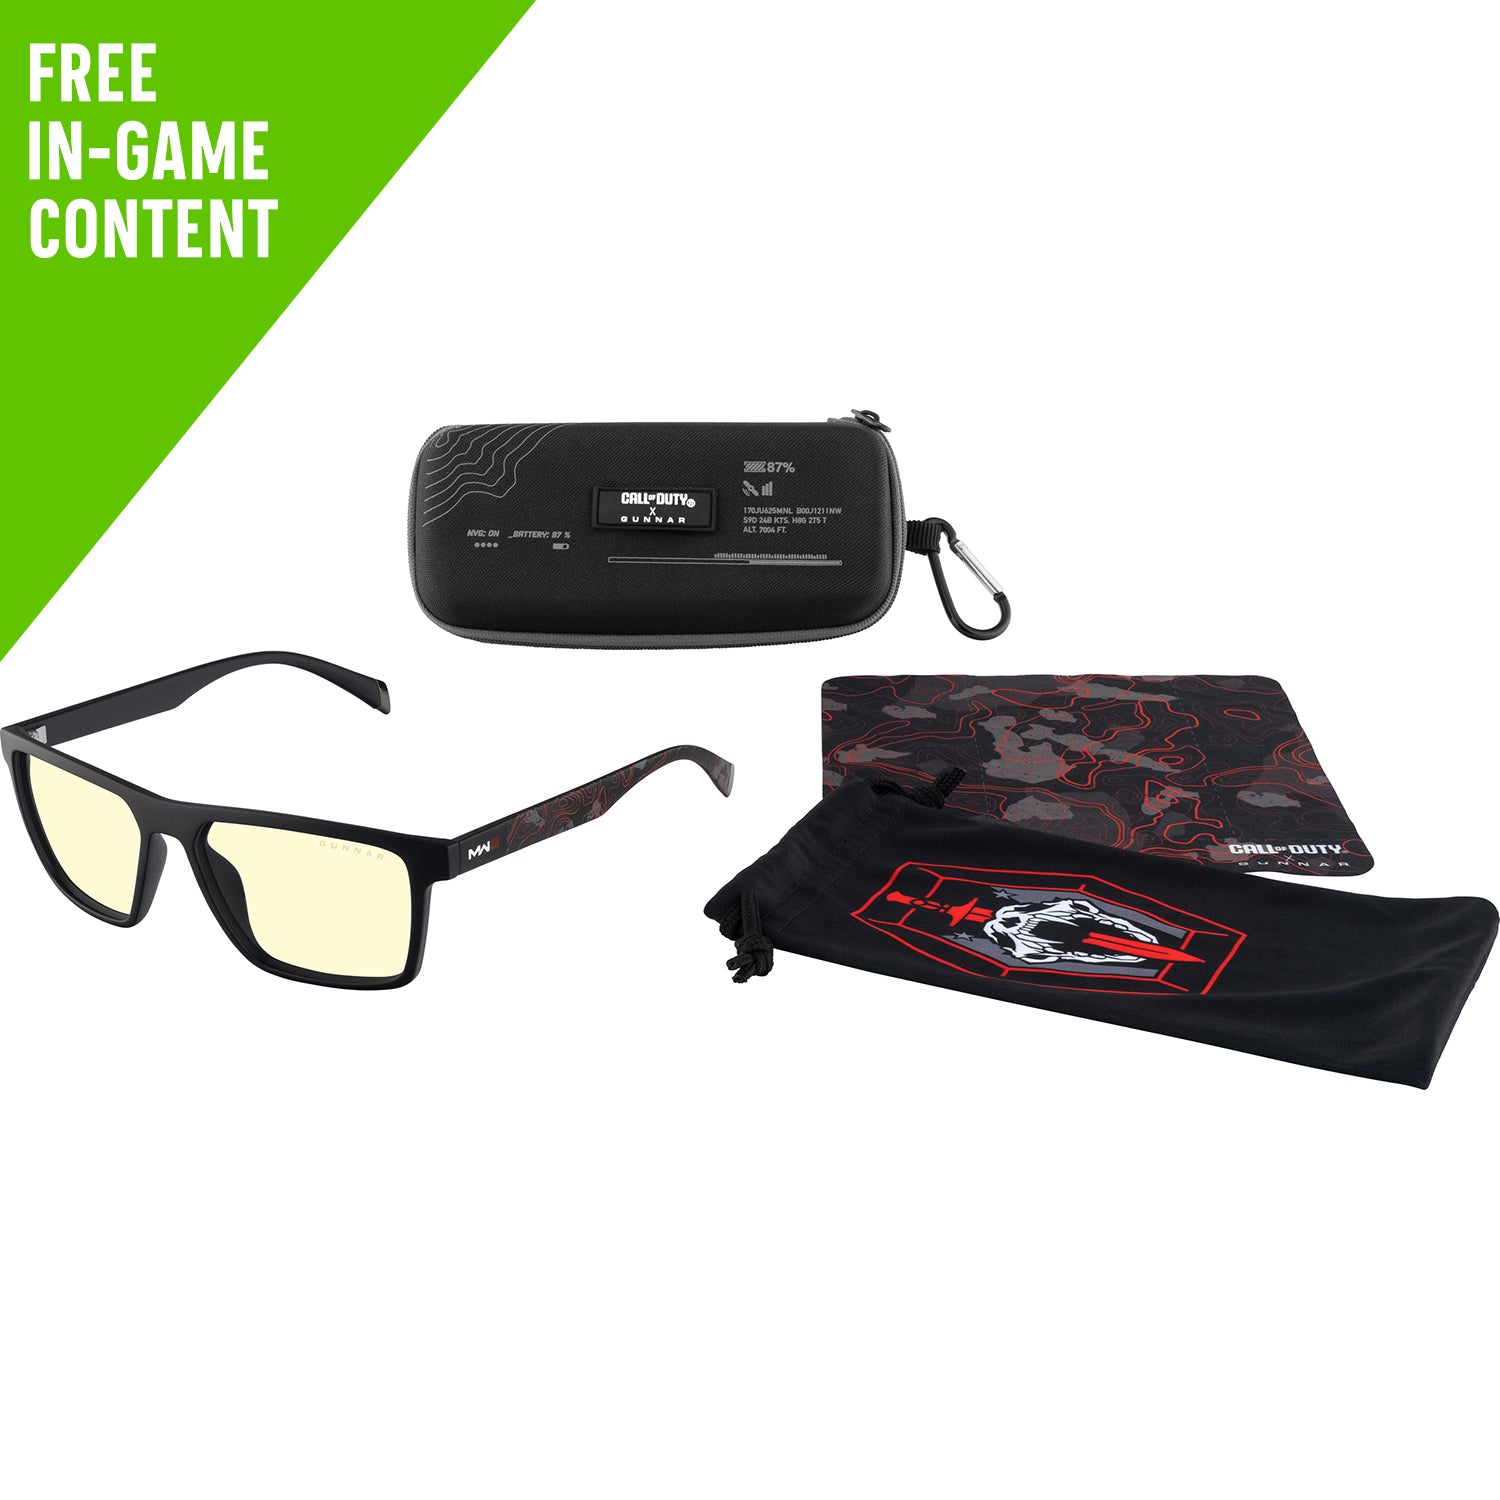 Call of Duty Alpha Edition Gunnar Blue Light Gaming Glasses - Collection Image - Free In-Game Content